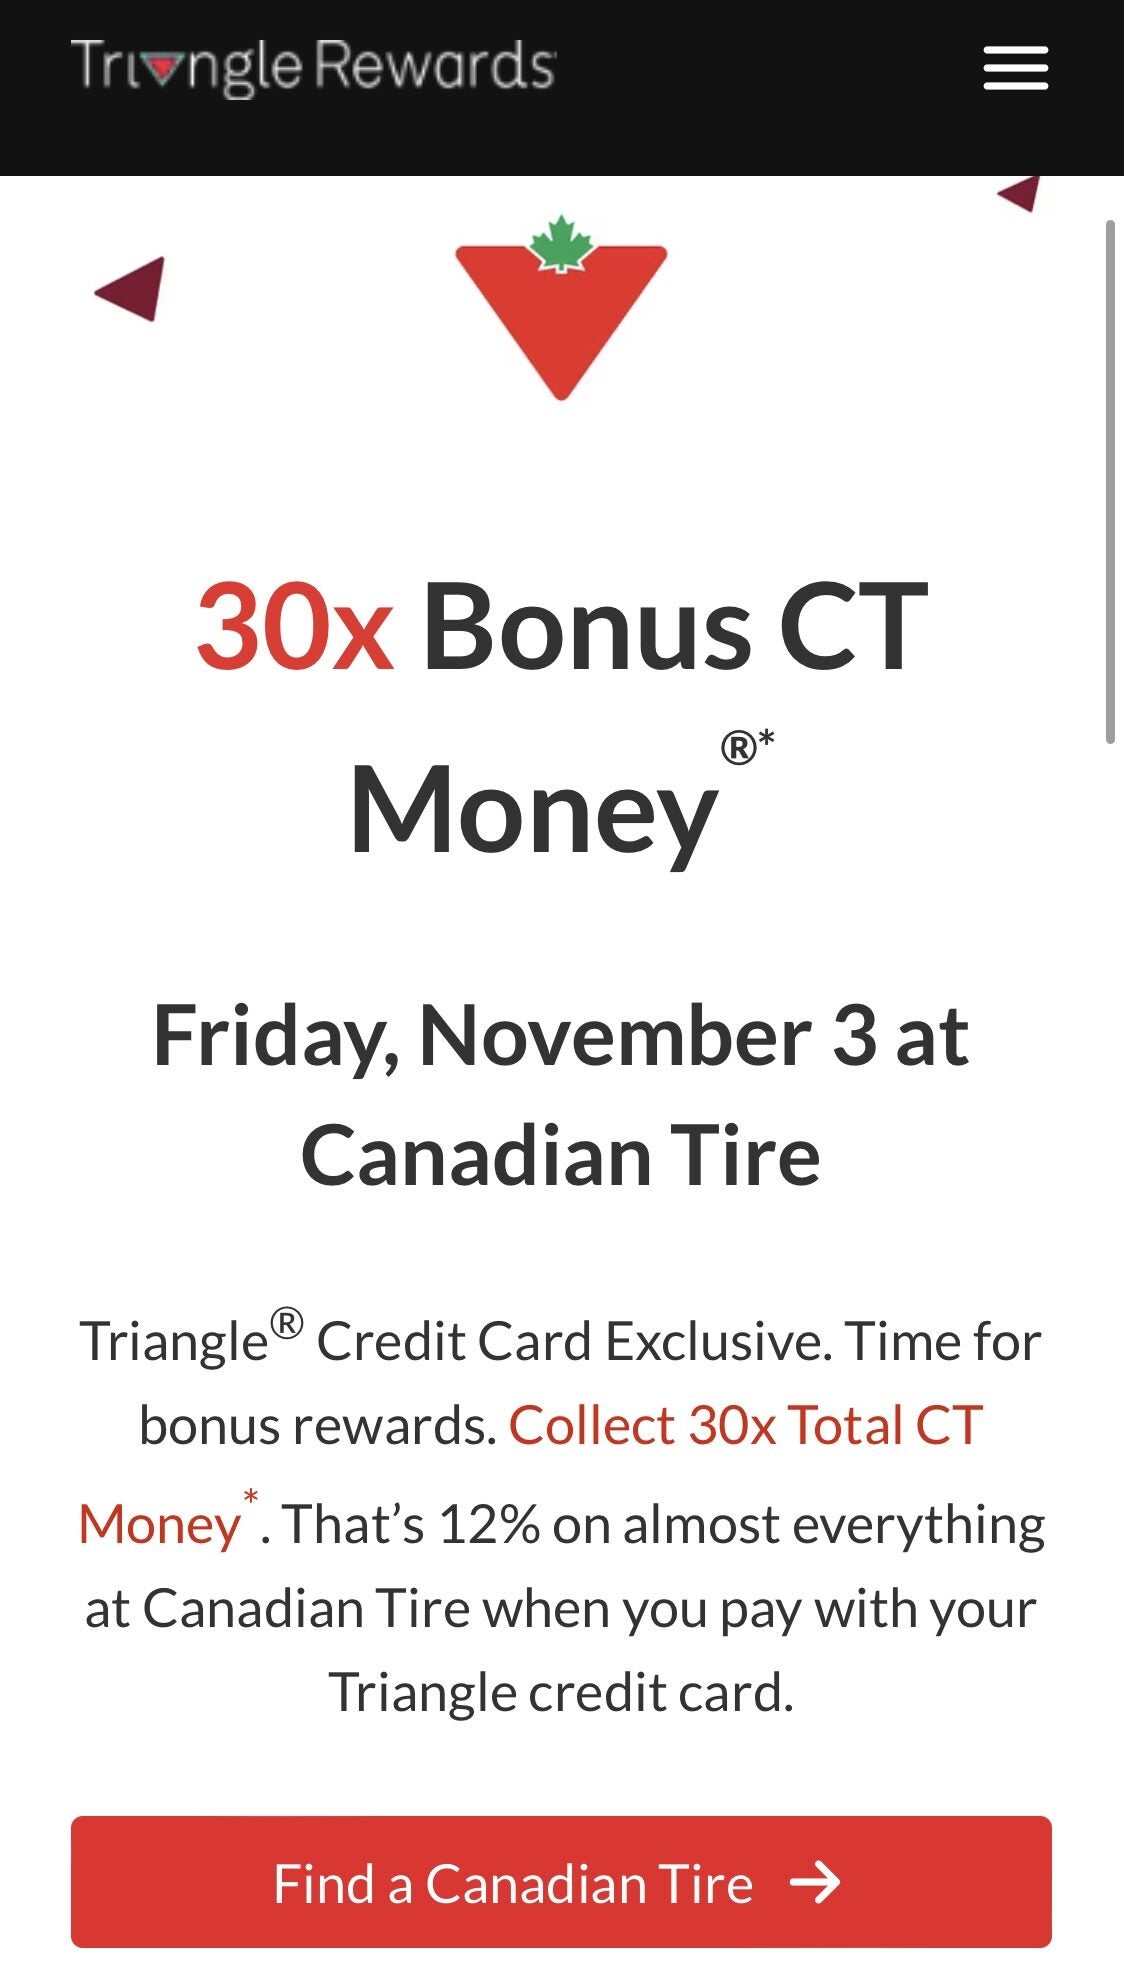 The Ultimate Guide to Canadian Tire's Triangle Rewards